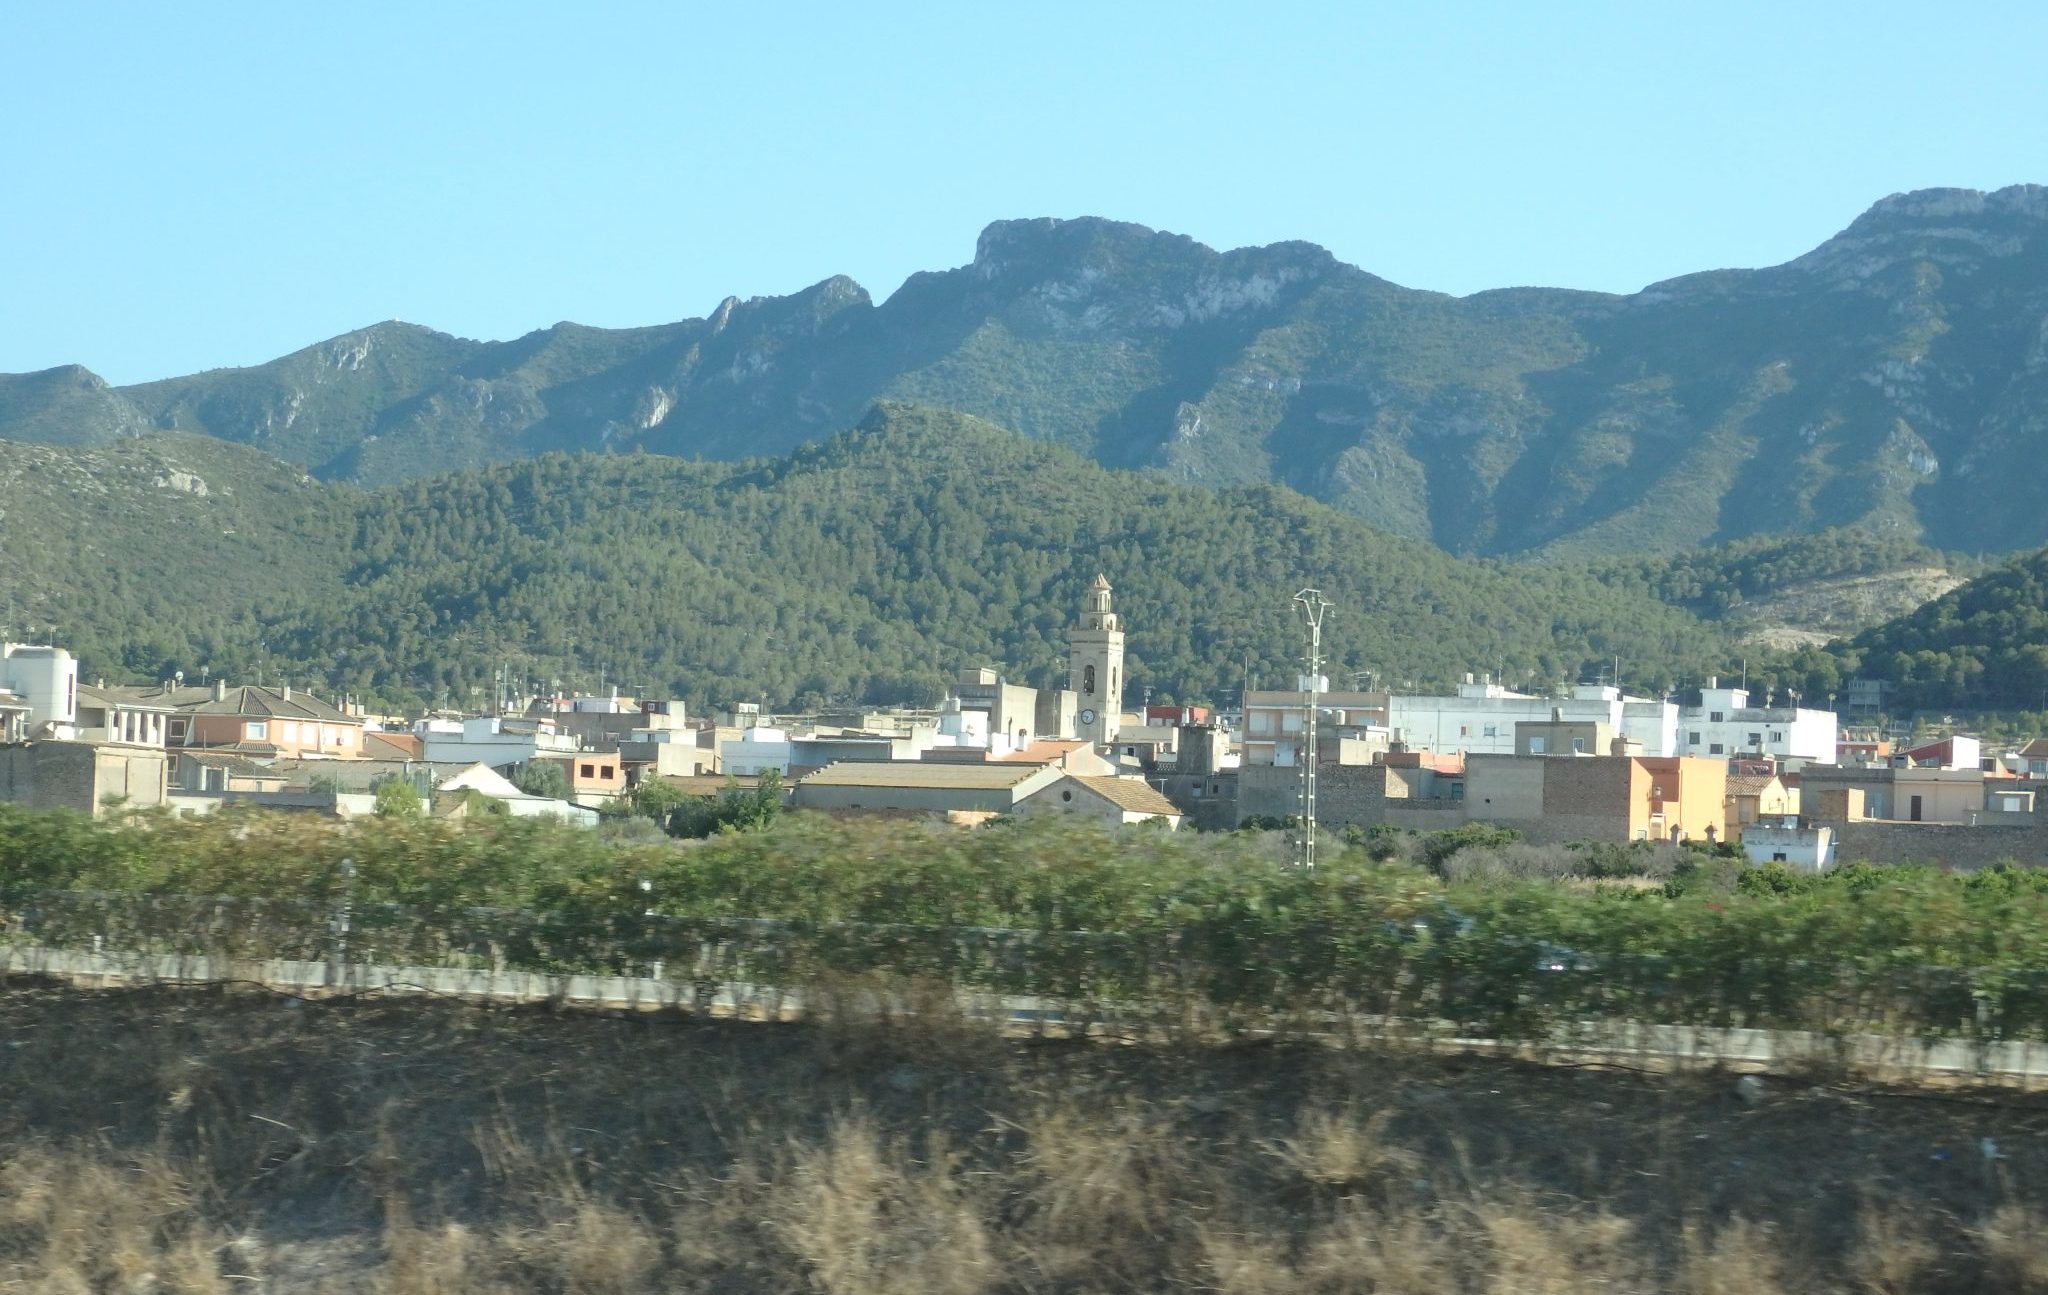 one of many villages you can spot from the highway in Baix Emporda